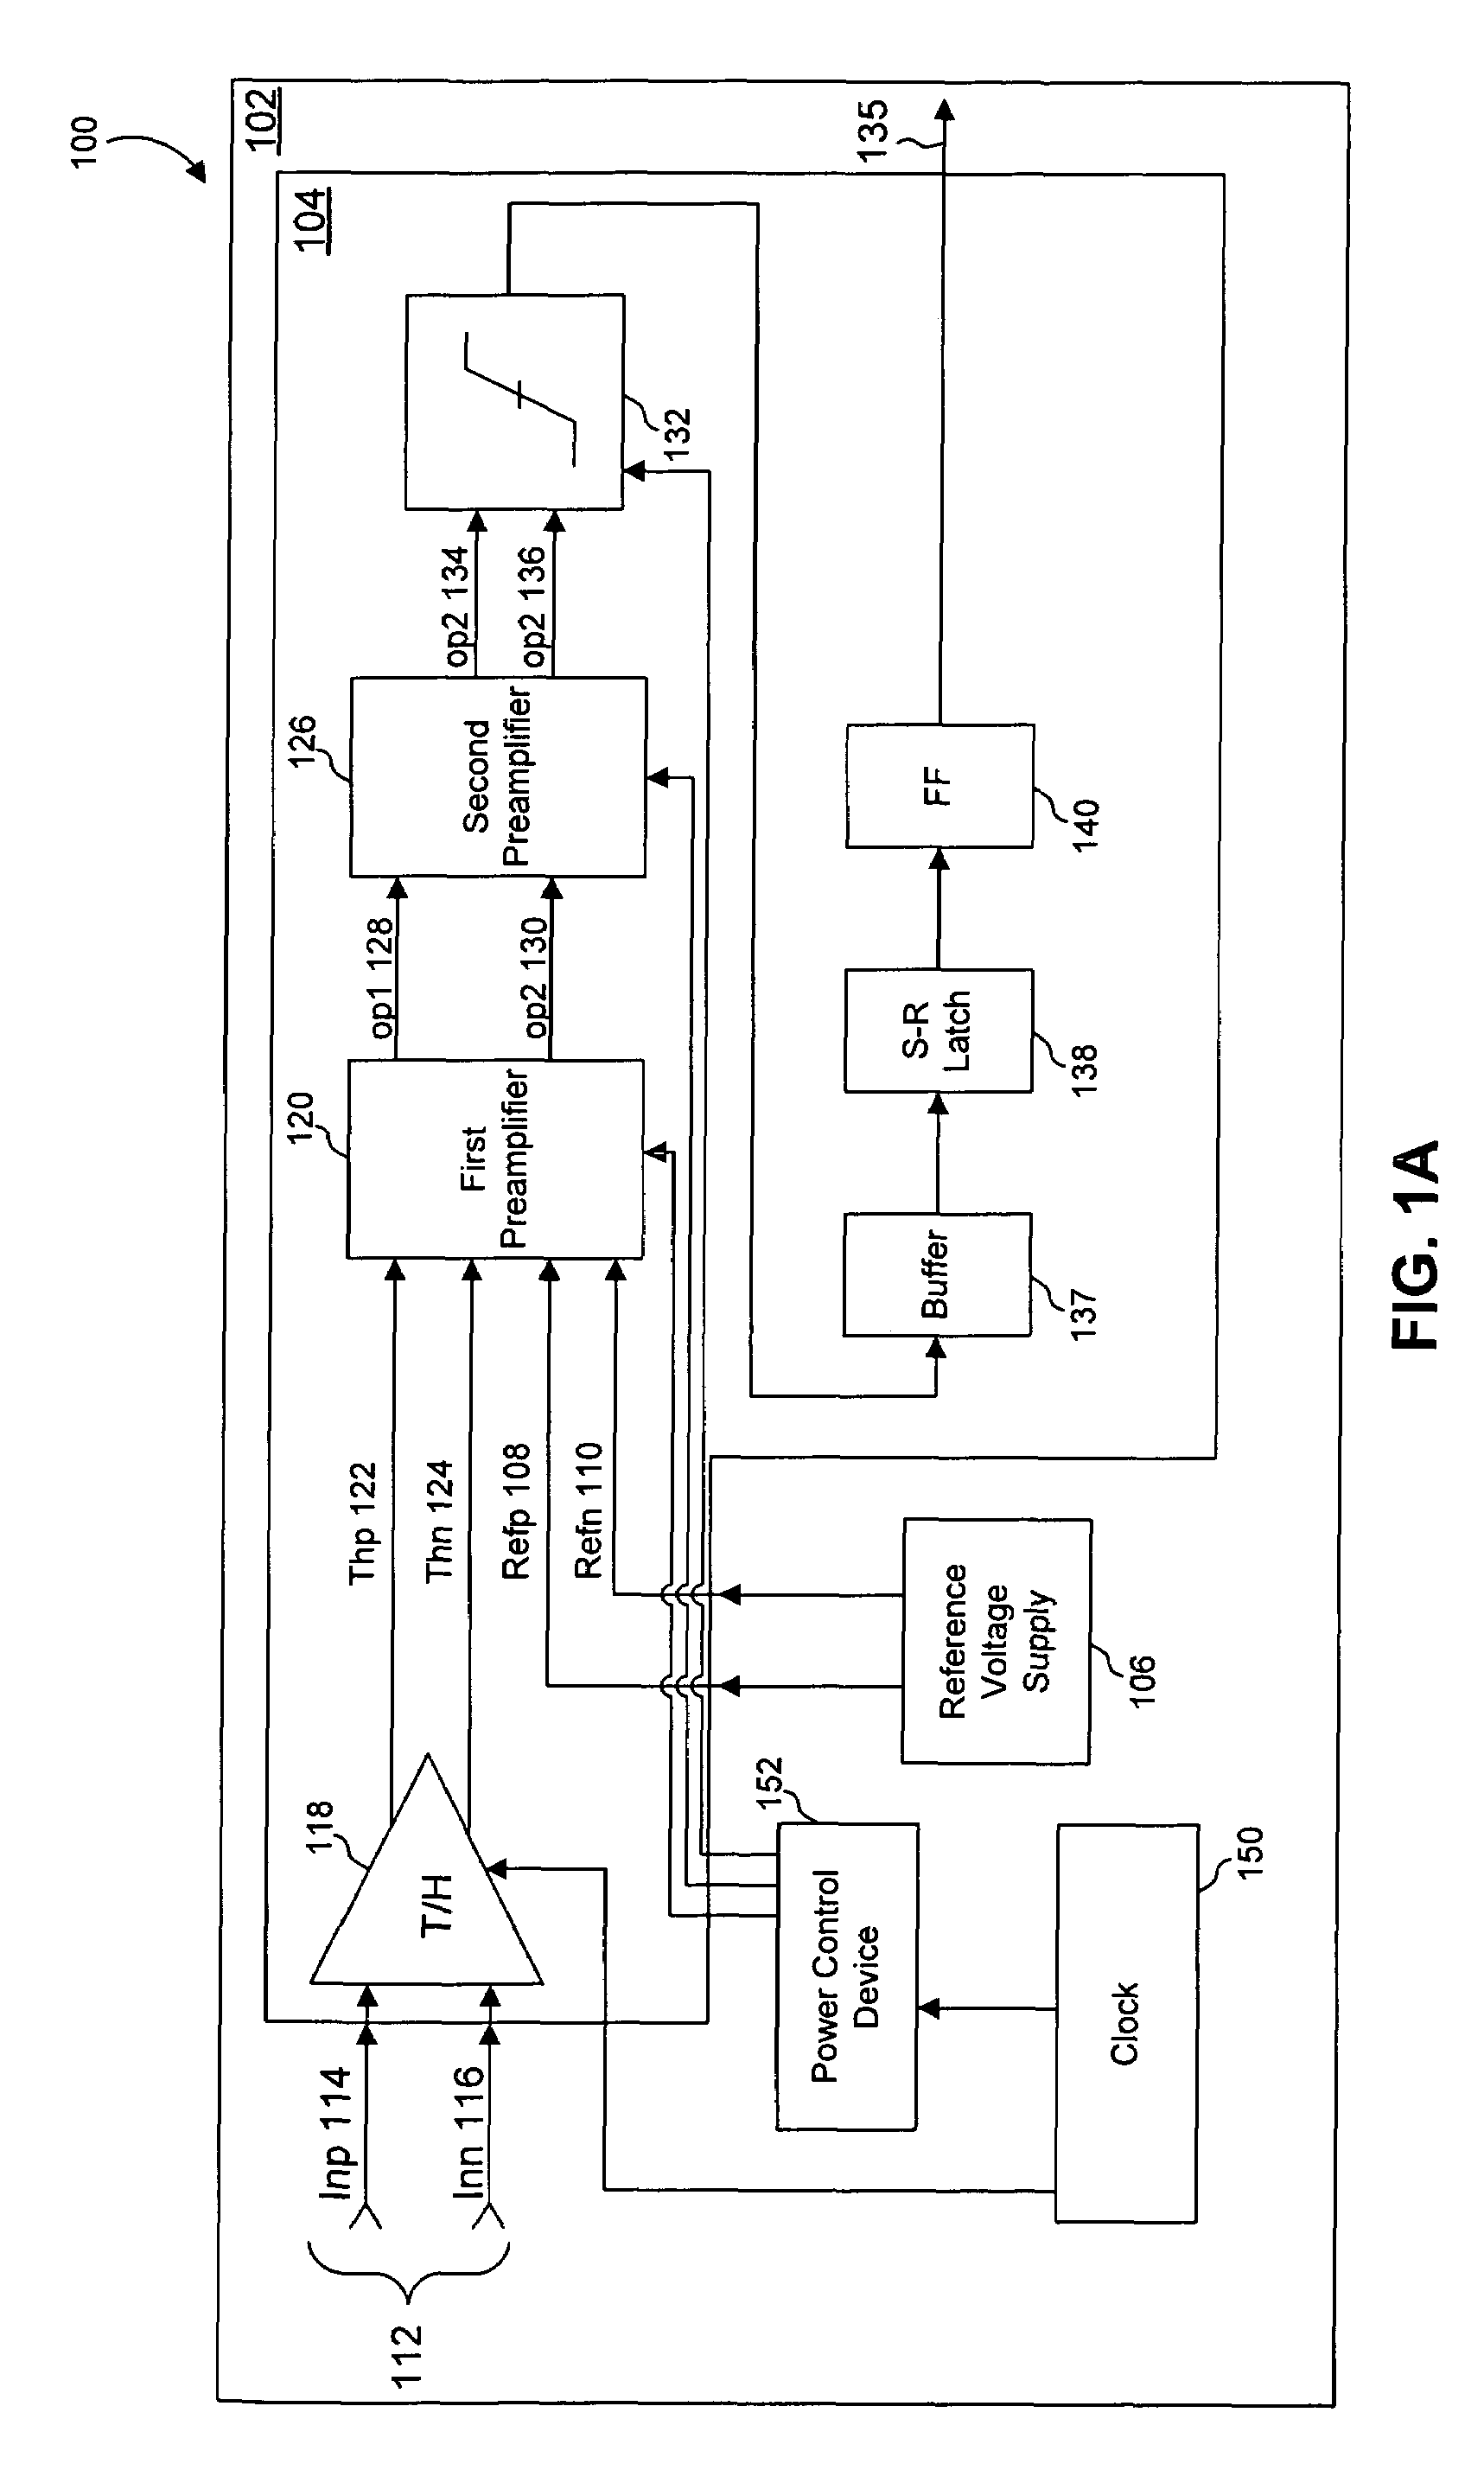 Analog to digital converter with dynamic power configuration